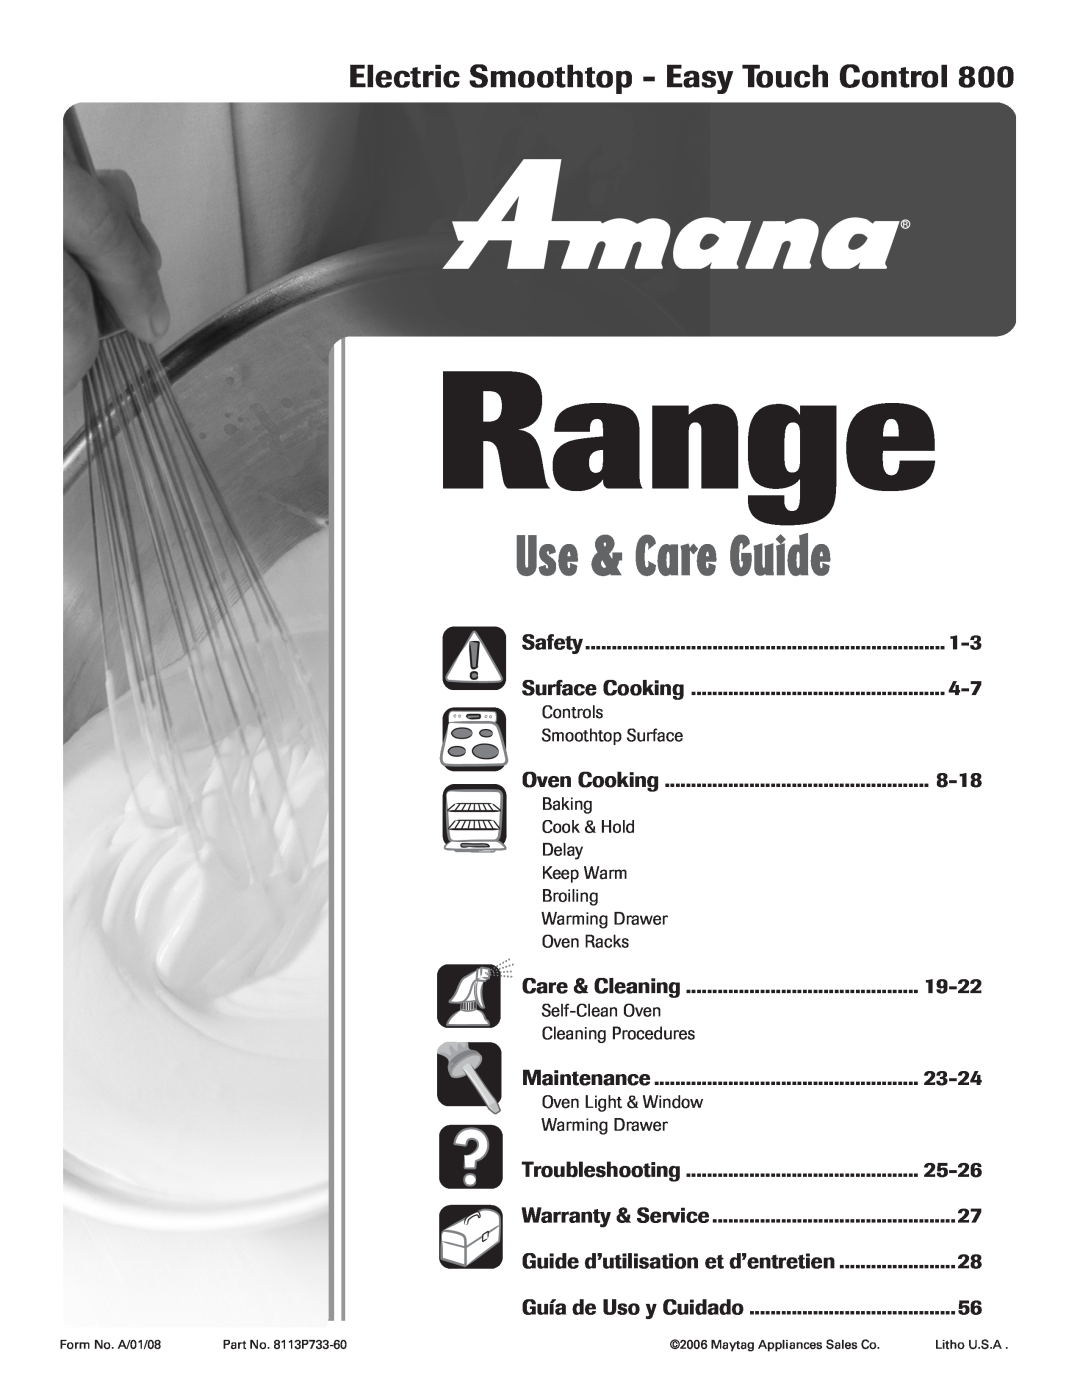 Amana AER5845RAW warranty Range, Electric Smoothtop - Easy Touch Control, Use & Care Guide 